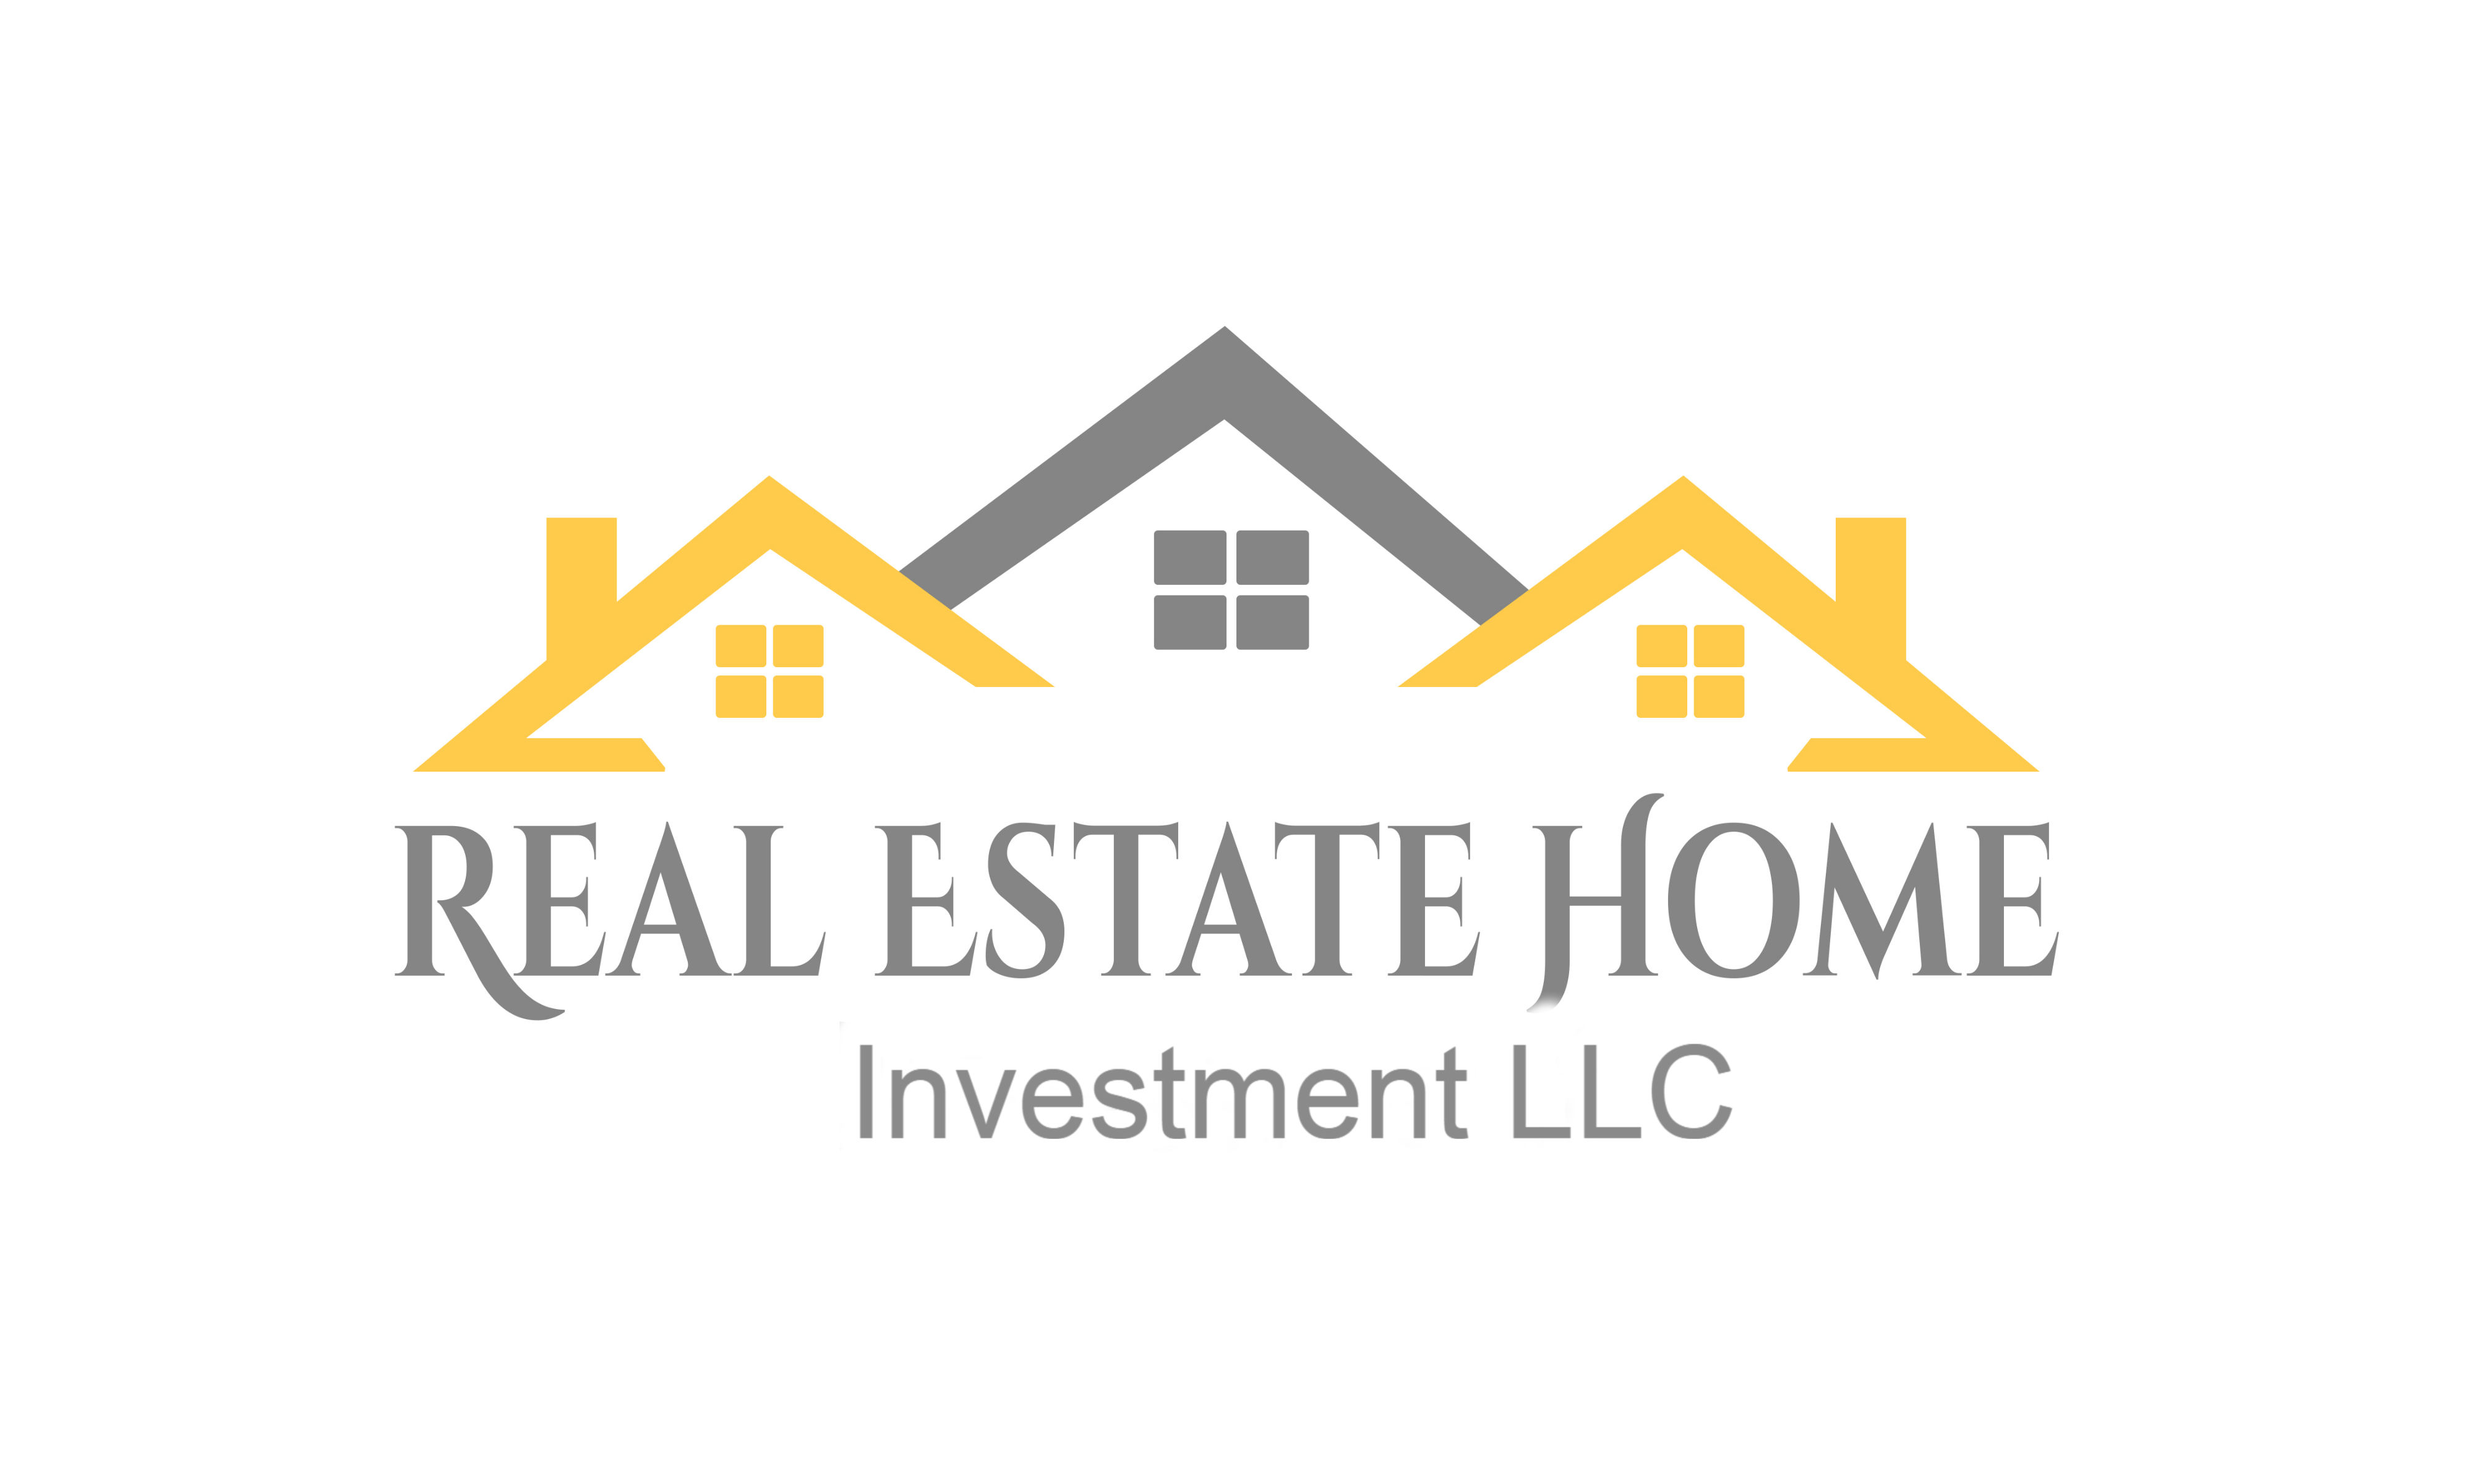 Real Estate Home Investment. LLC